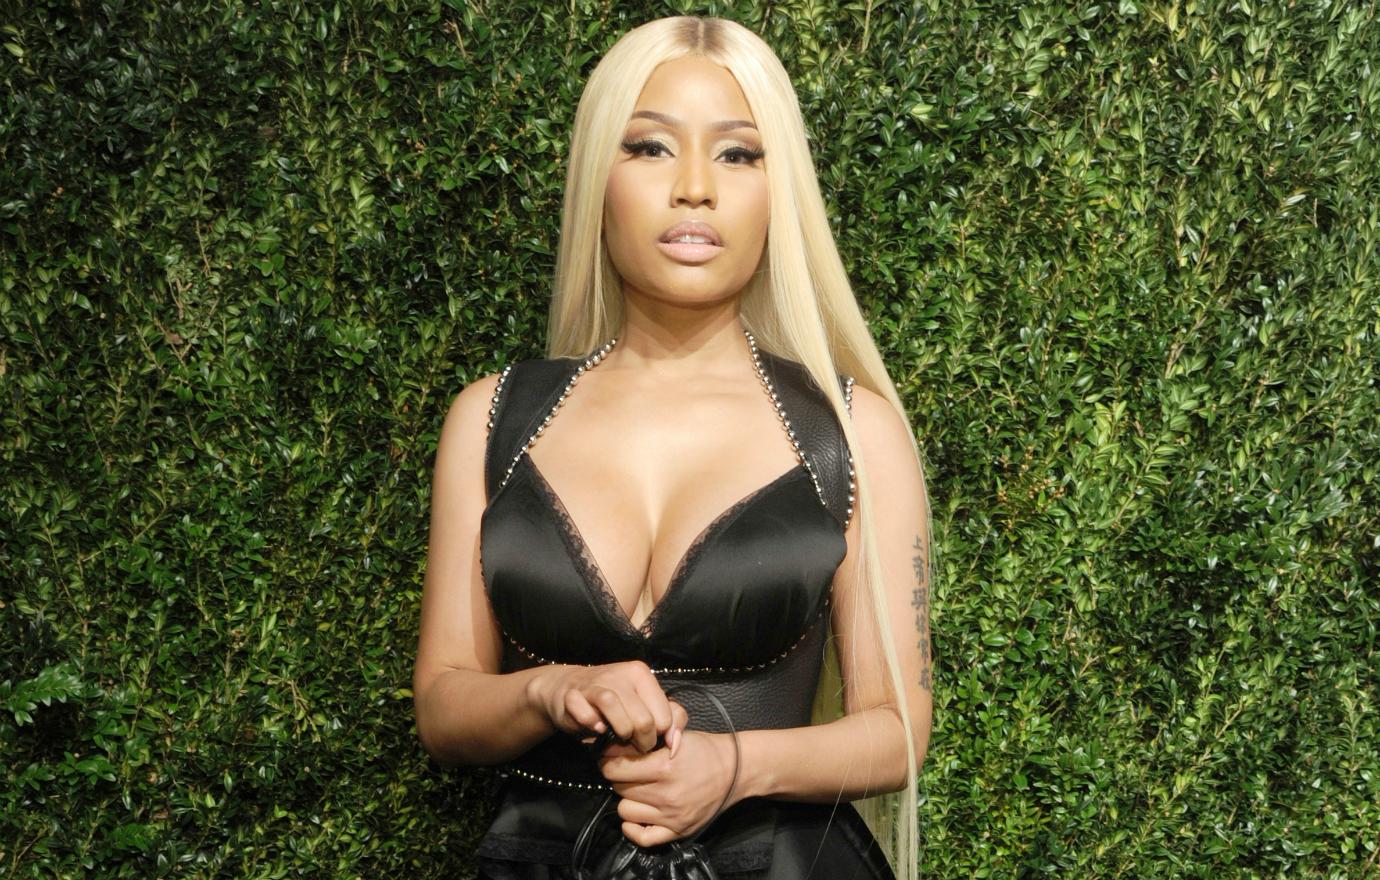 Nicki Minaj wears a cleavage baring black dress with silver stud accents and long blonde hair at the 2017 Vogue Fashion Fund Gala.